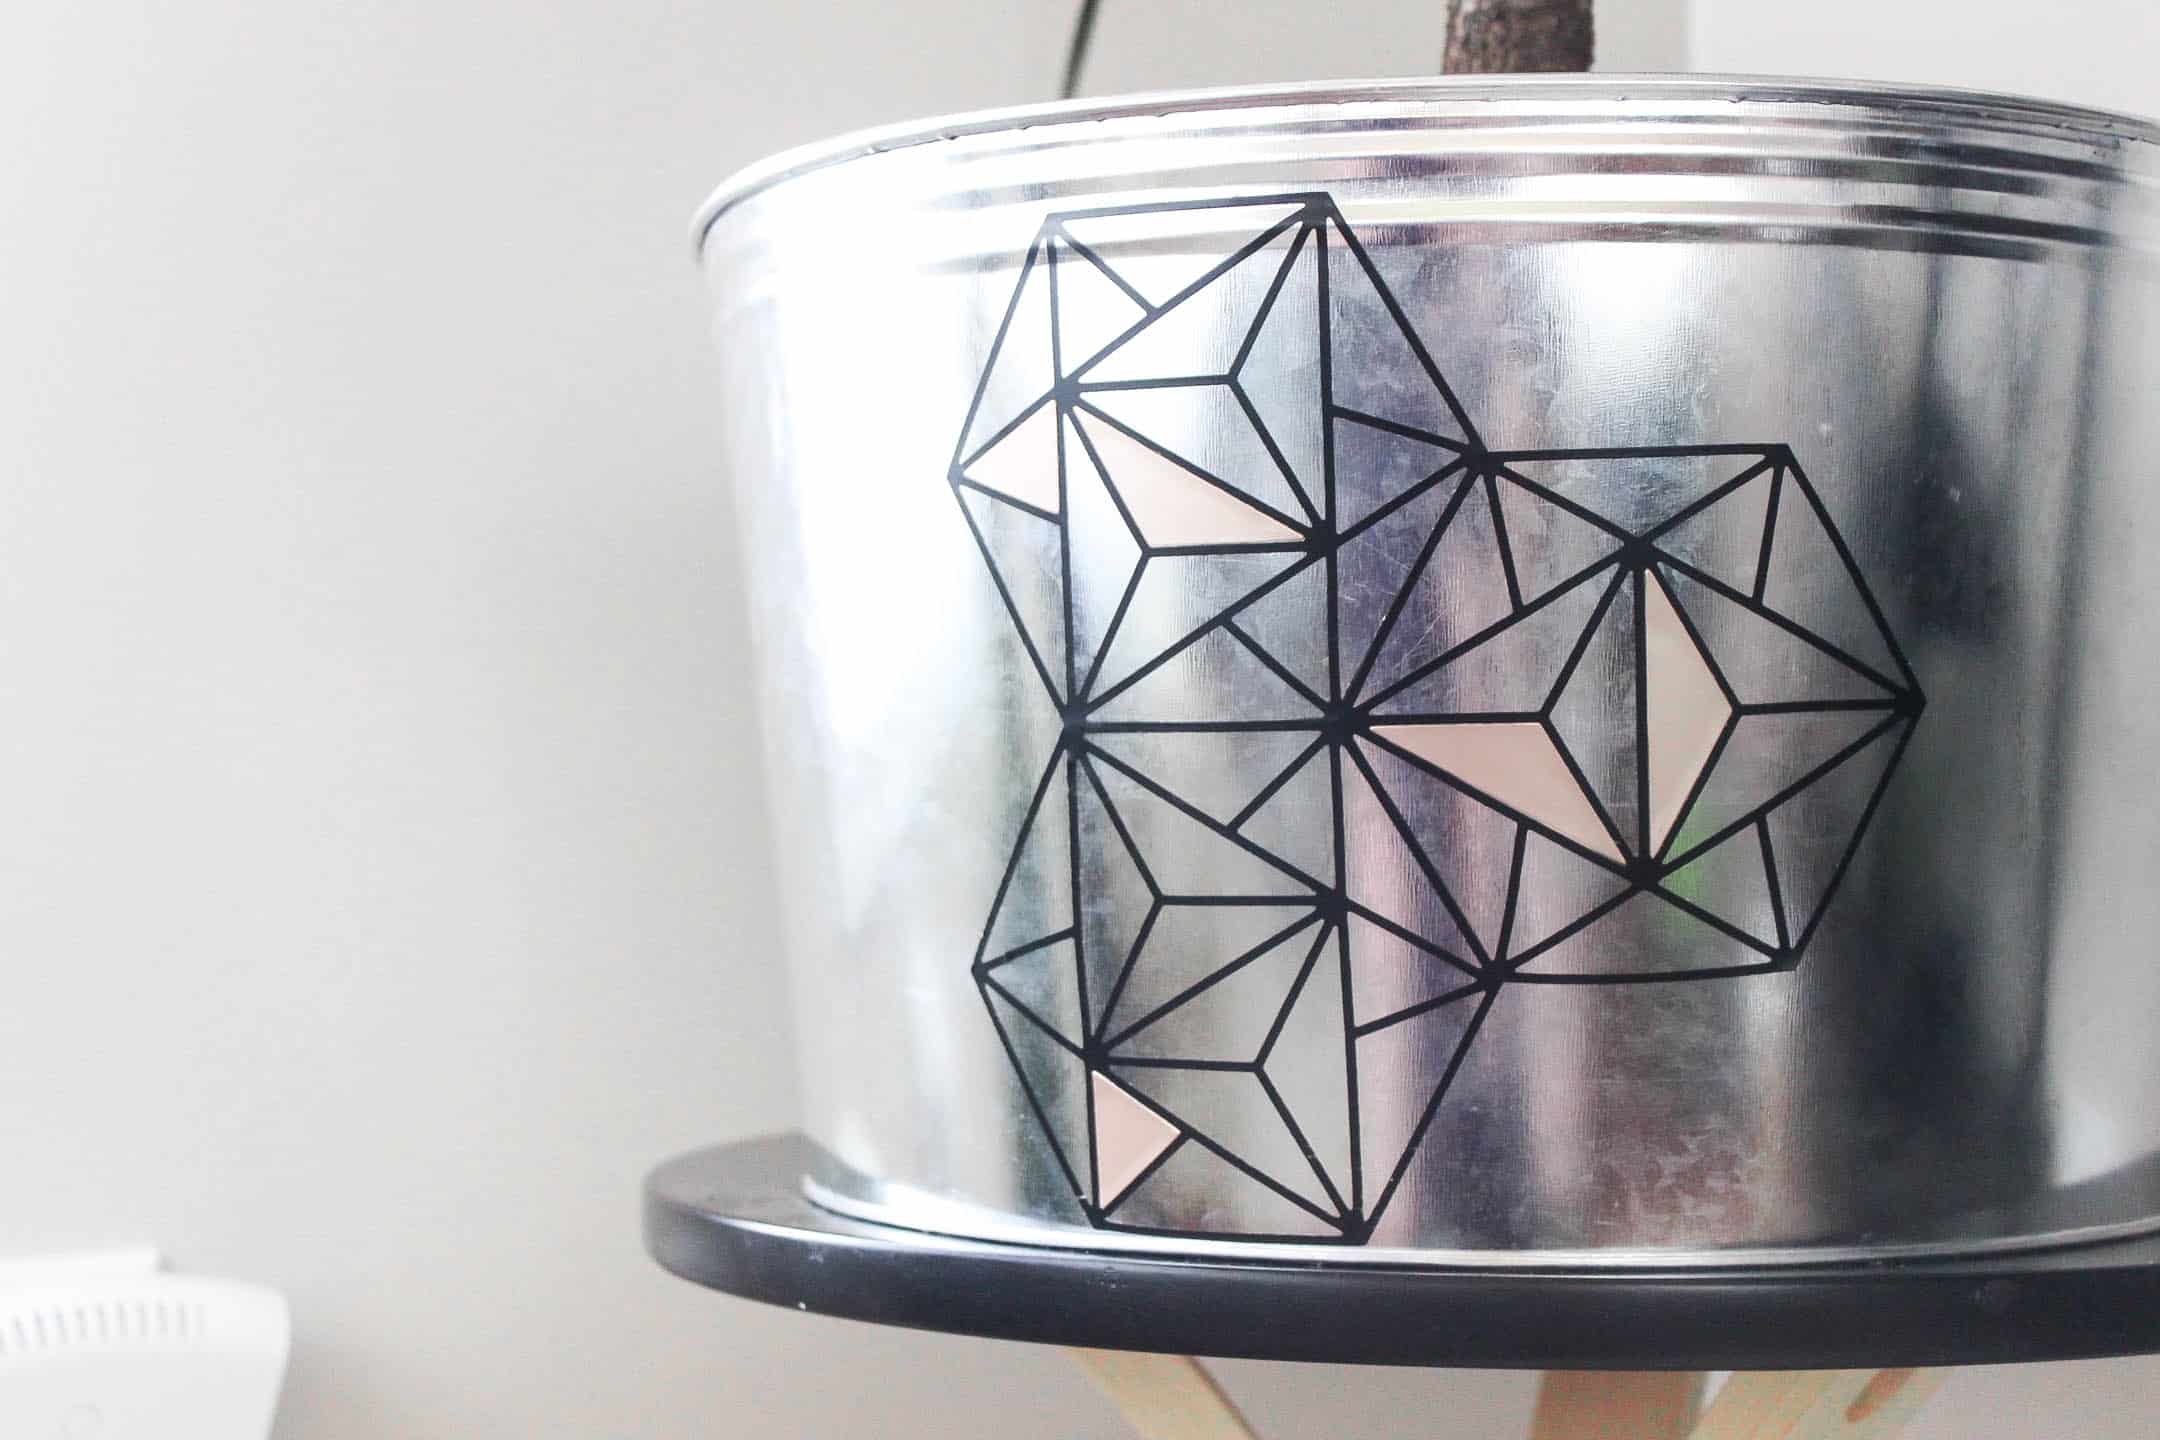 Make this modern geometric planter for any corner in your home. Love the indurstrial chic flair to this home decor project idea!